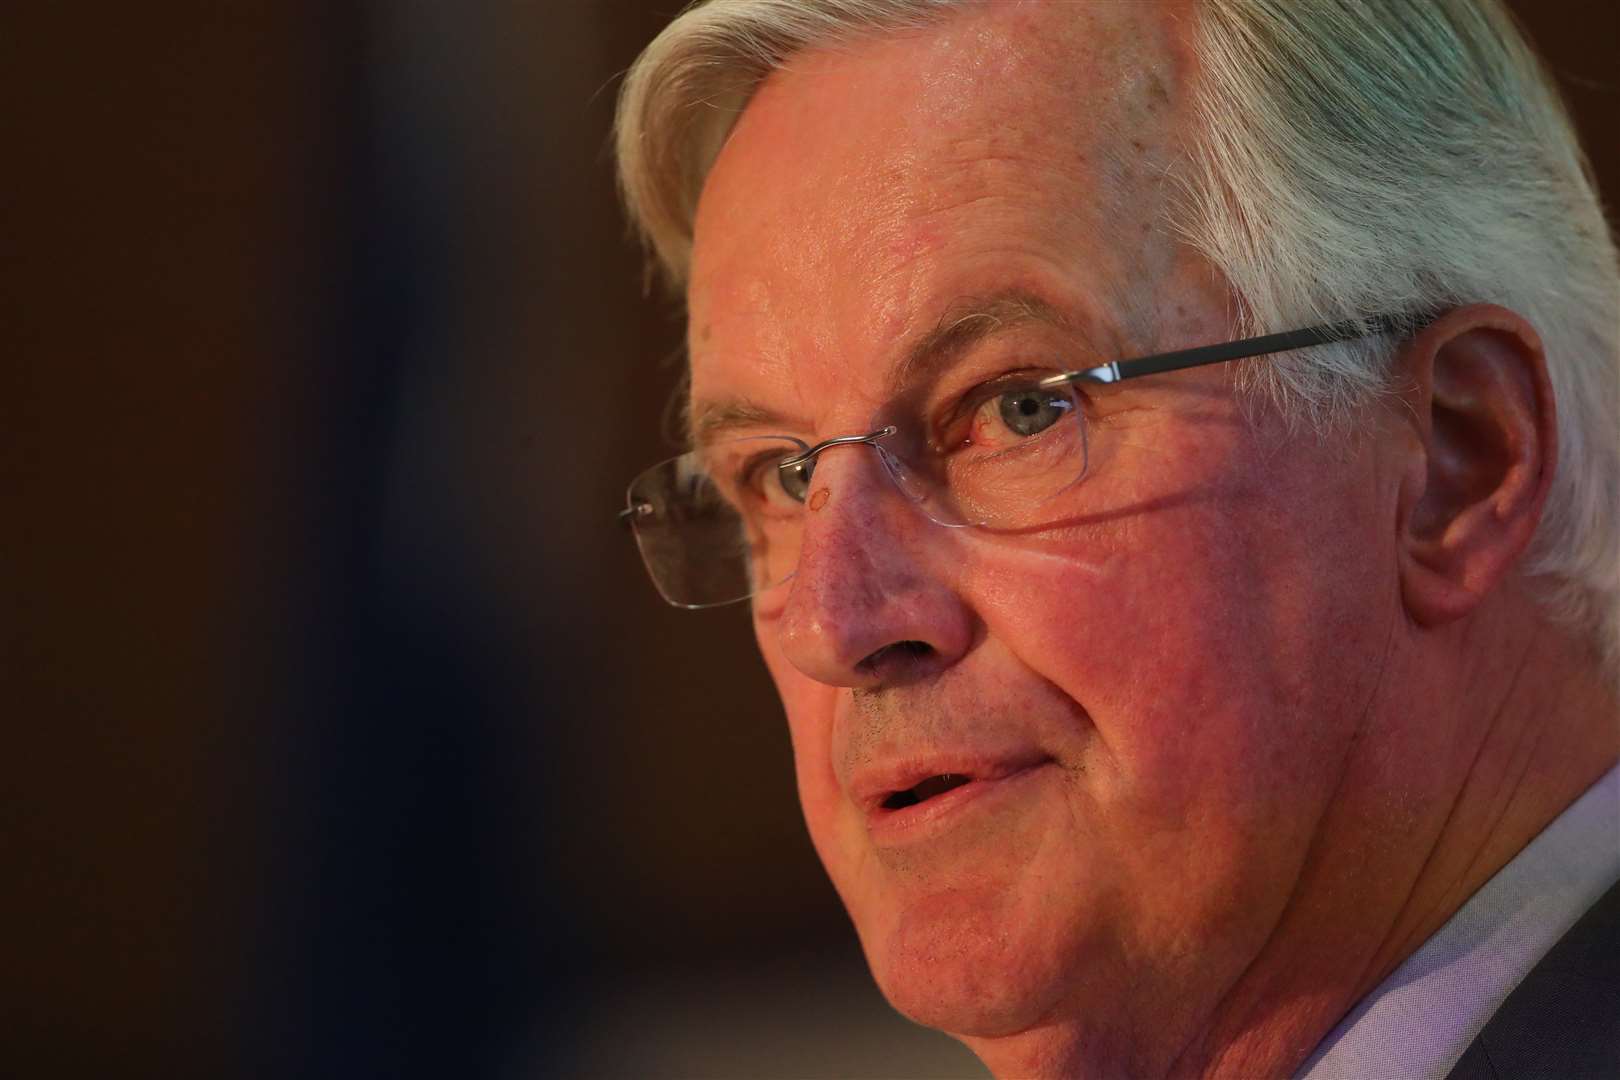 Michel Barnier has made it clear there will need to be better engagement from the UK in the next round of talks, Mr Coveney said (Liam McBurney/PA)